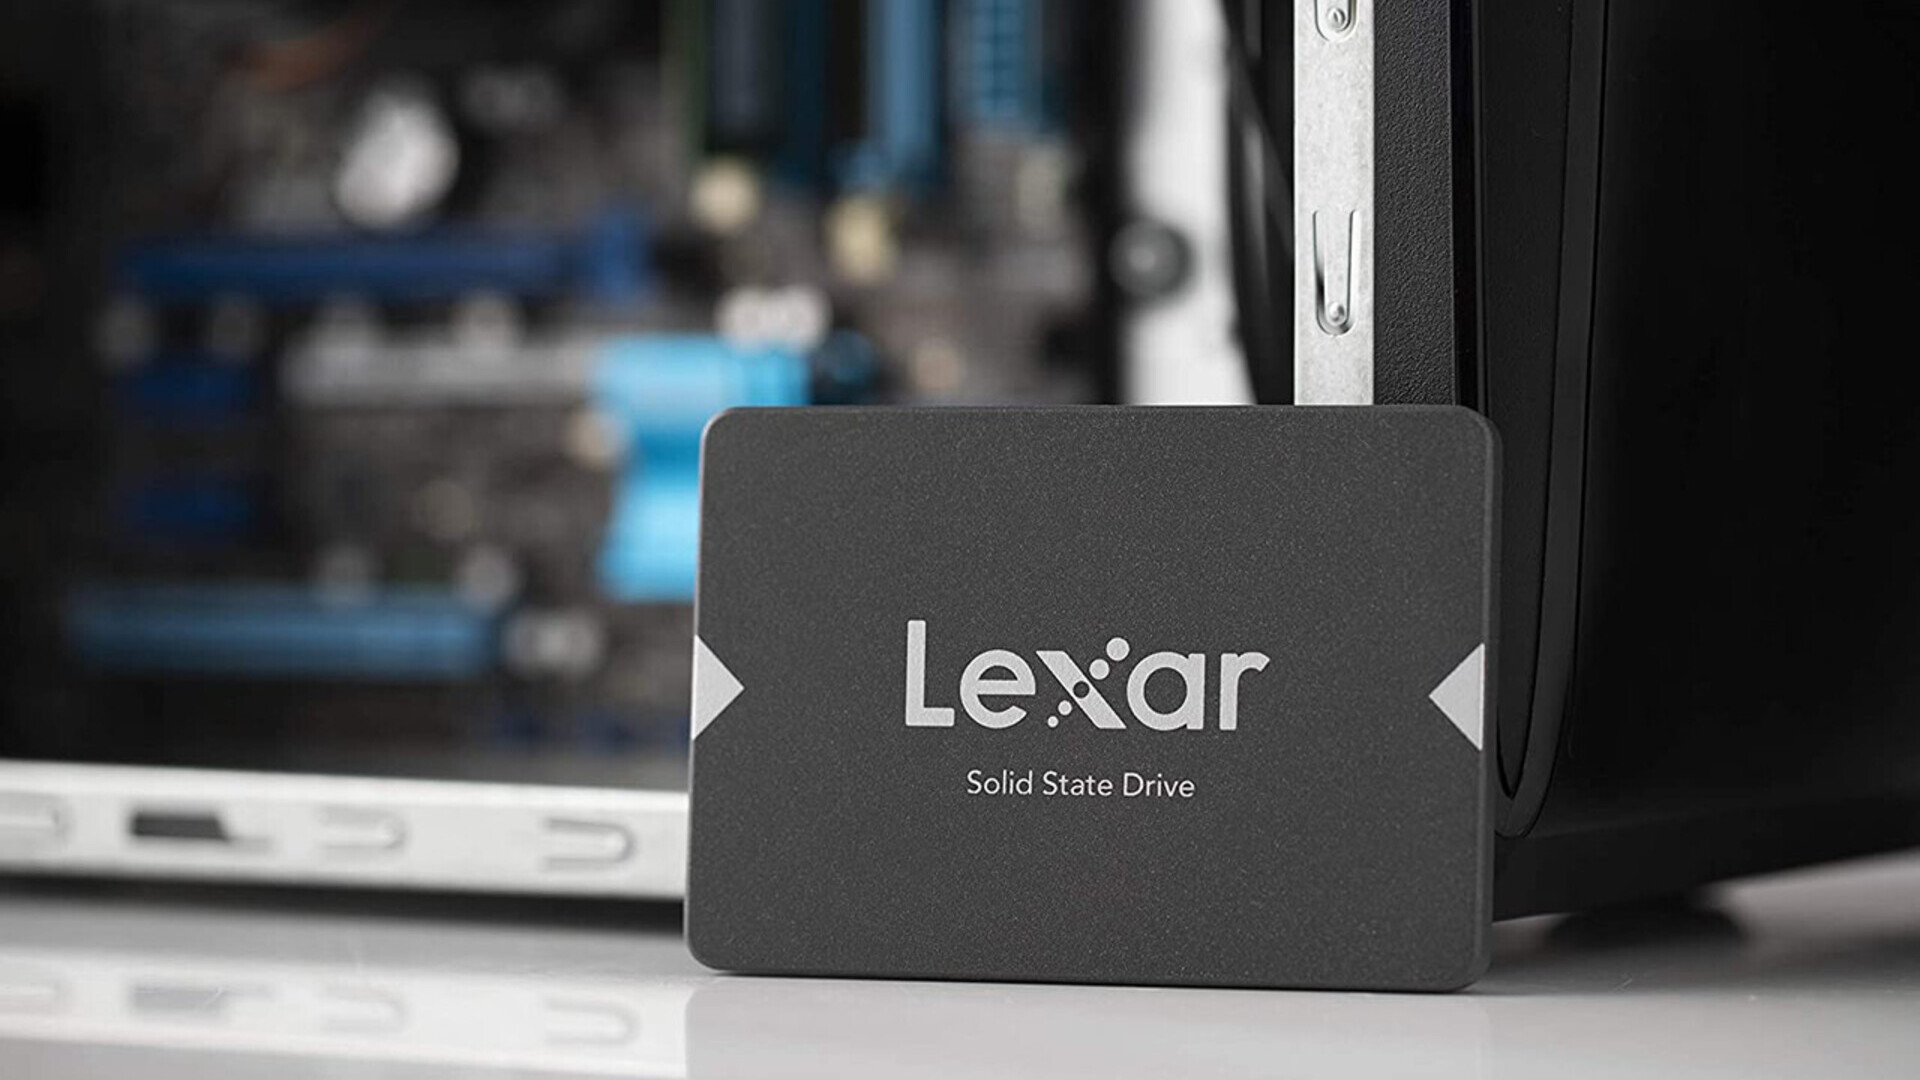 Features of the Lexar NS100 2.5” SATA III storage unit